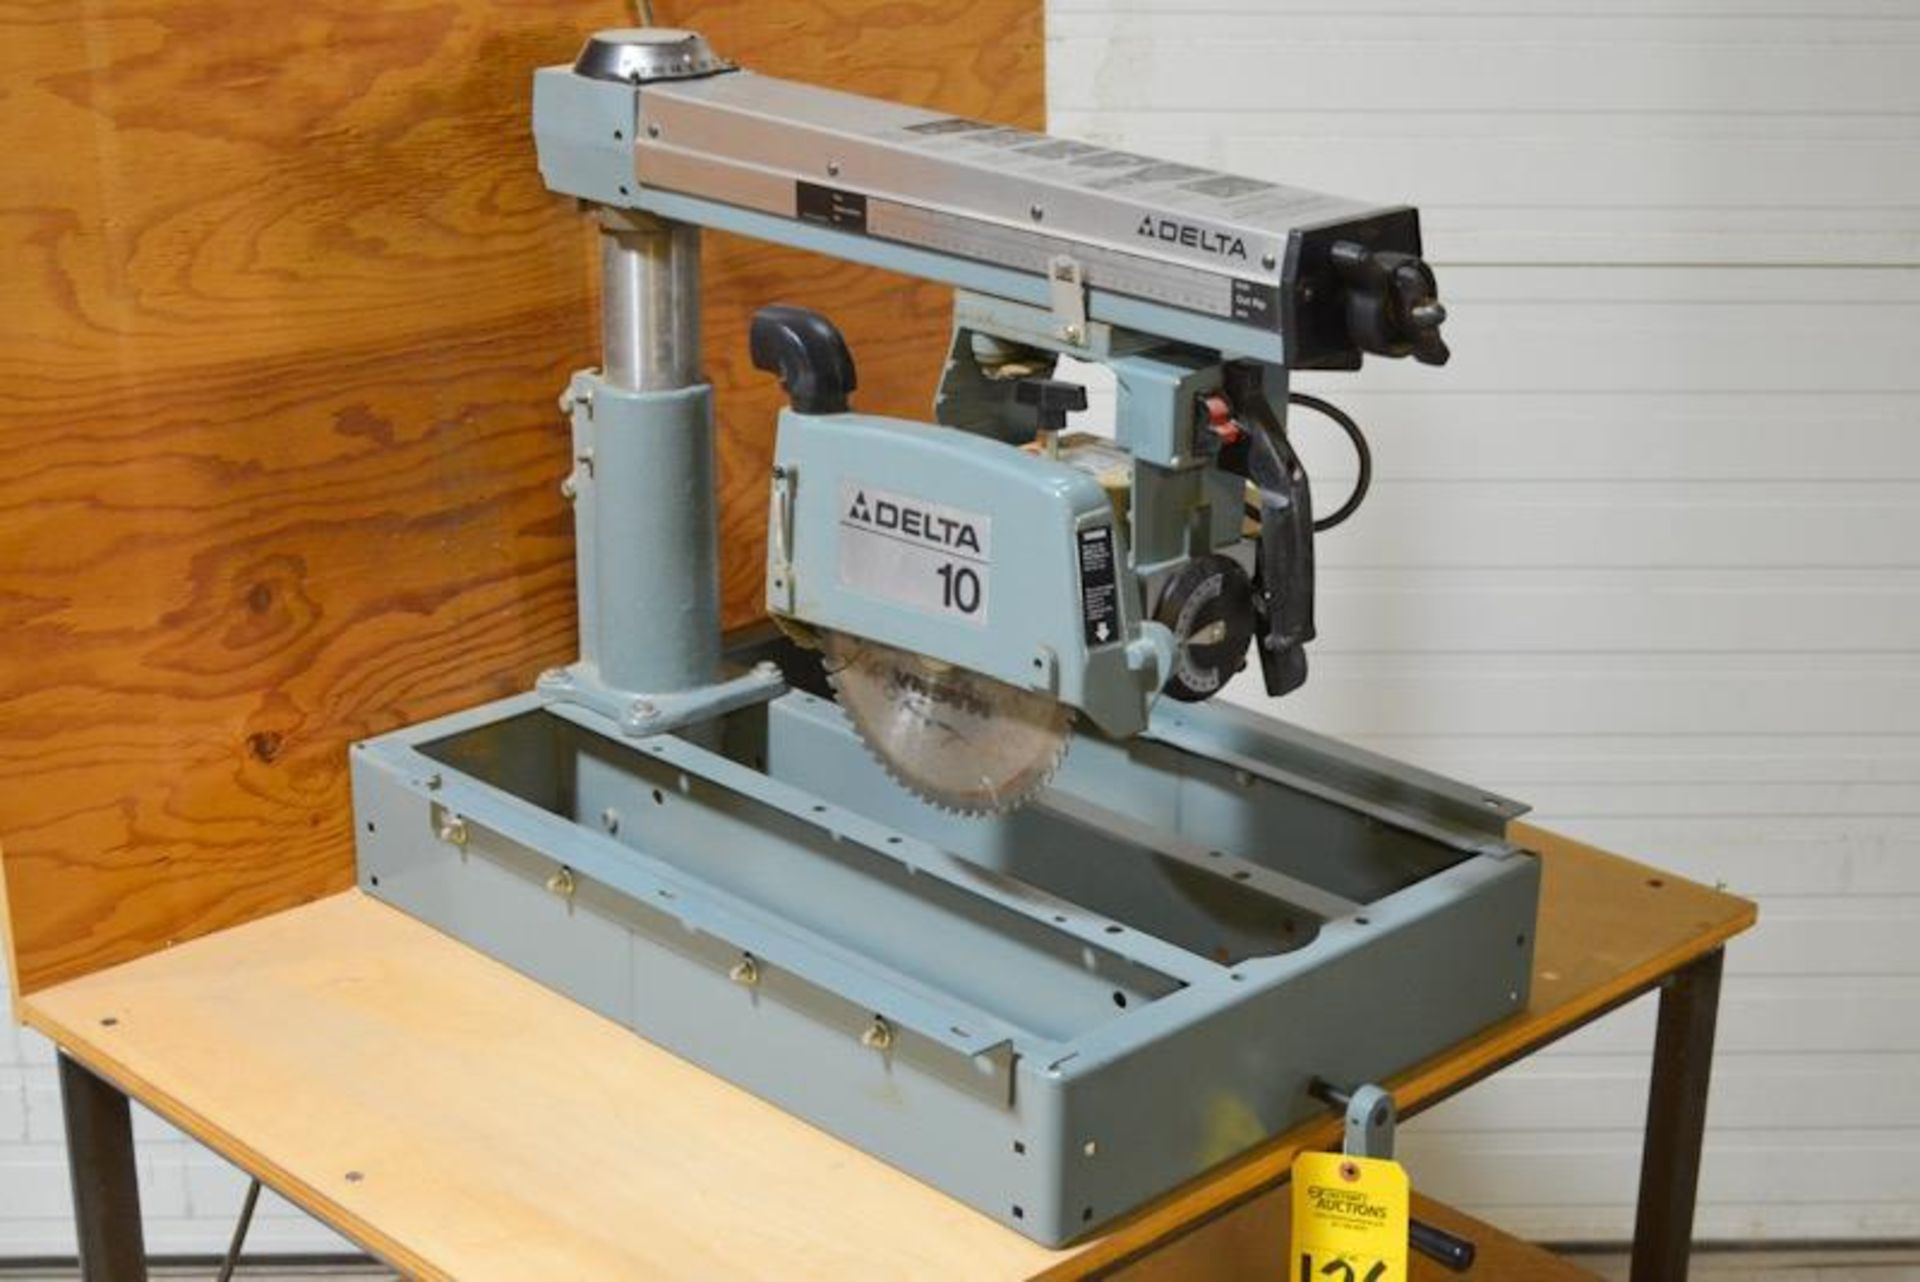 DELTA 10 10” RADIAL ARM SAW, BLADE SIZE 20” X 30” X 4.75”H, RIP CAP. 0-14” IN / 12” – 24” OUT, BLADE